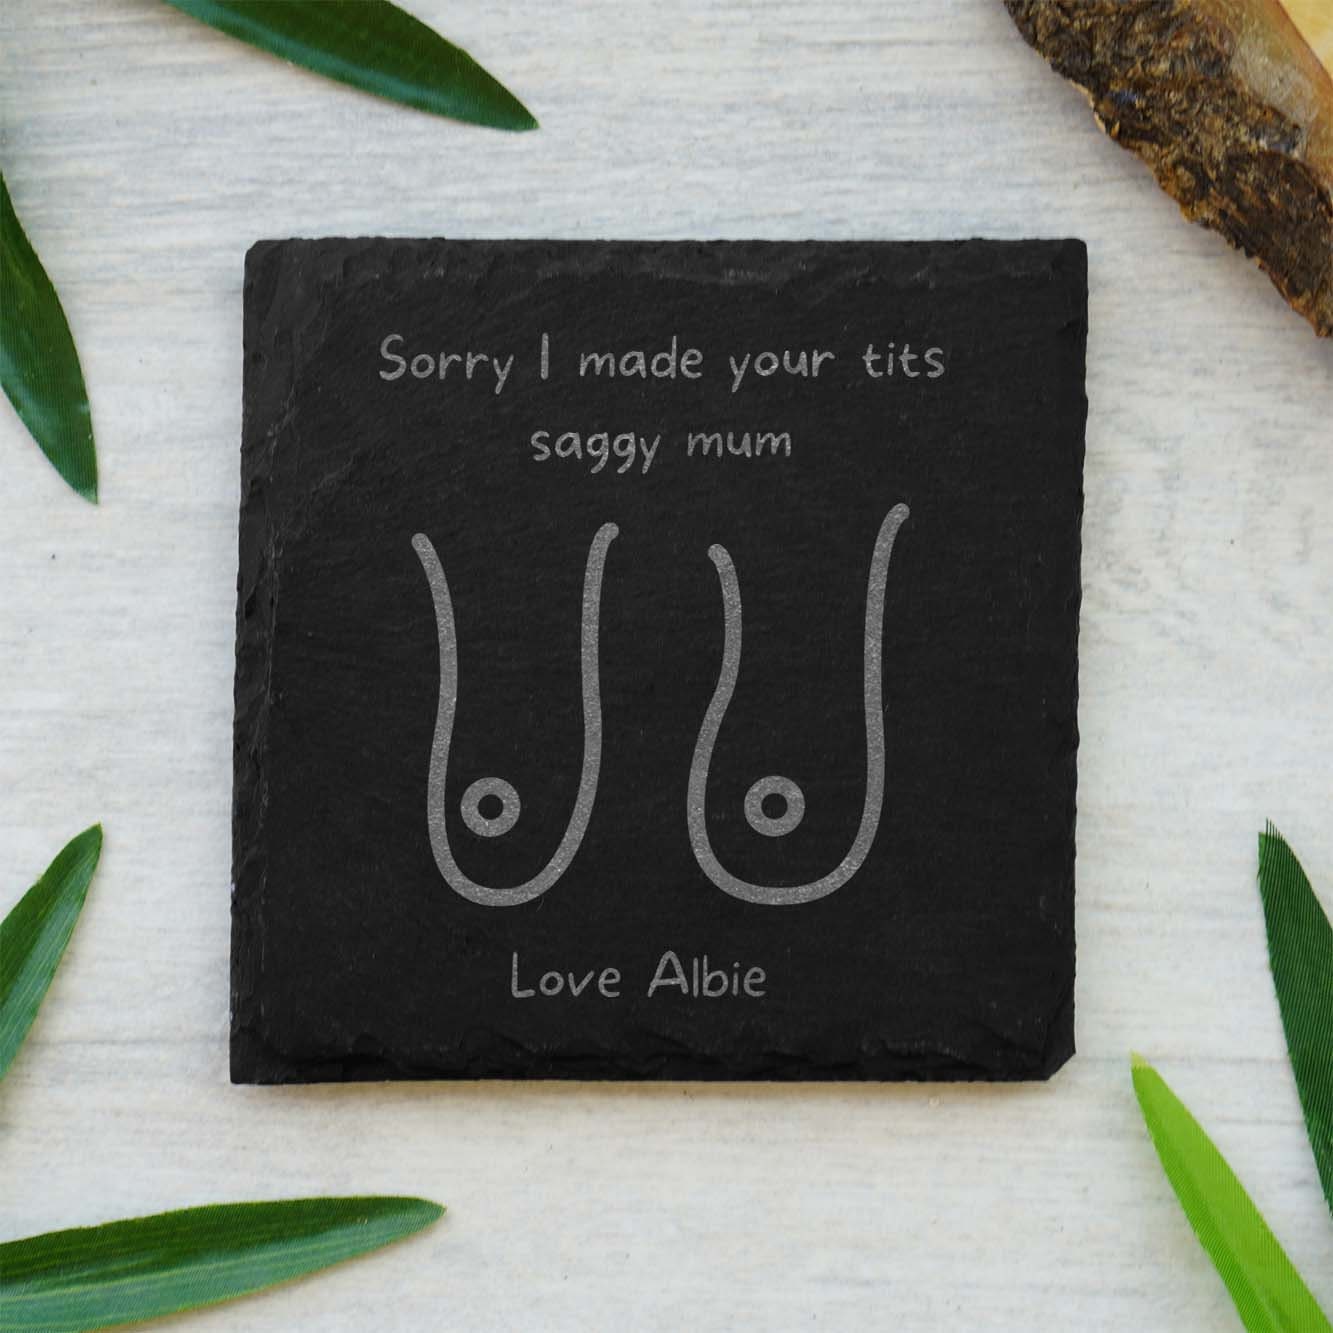 Funny Personalised Slate Coaster Gift for Mums (Sorry for making your t**ts saggy Mum)